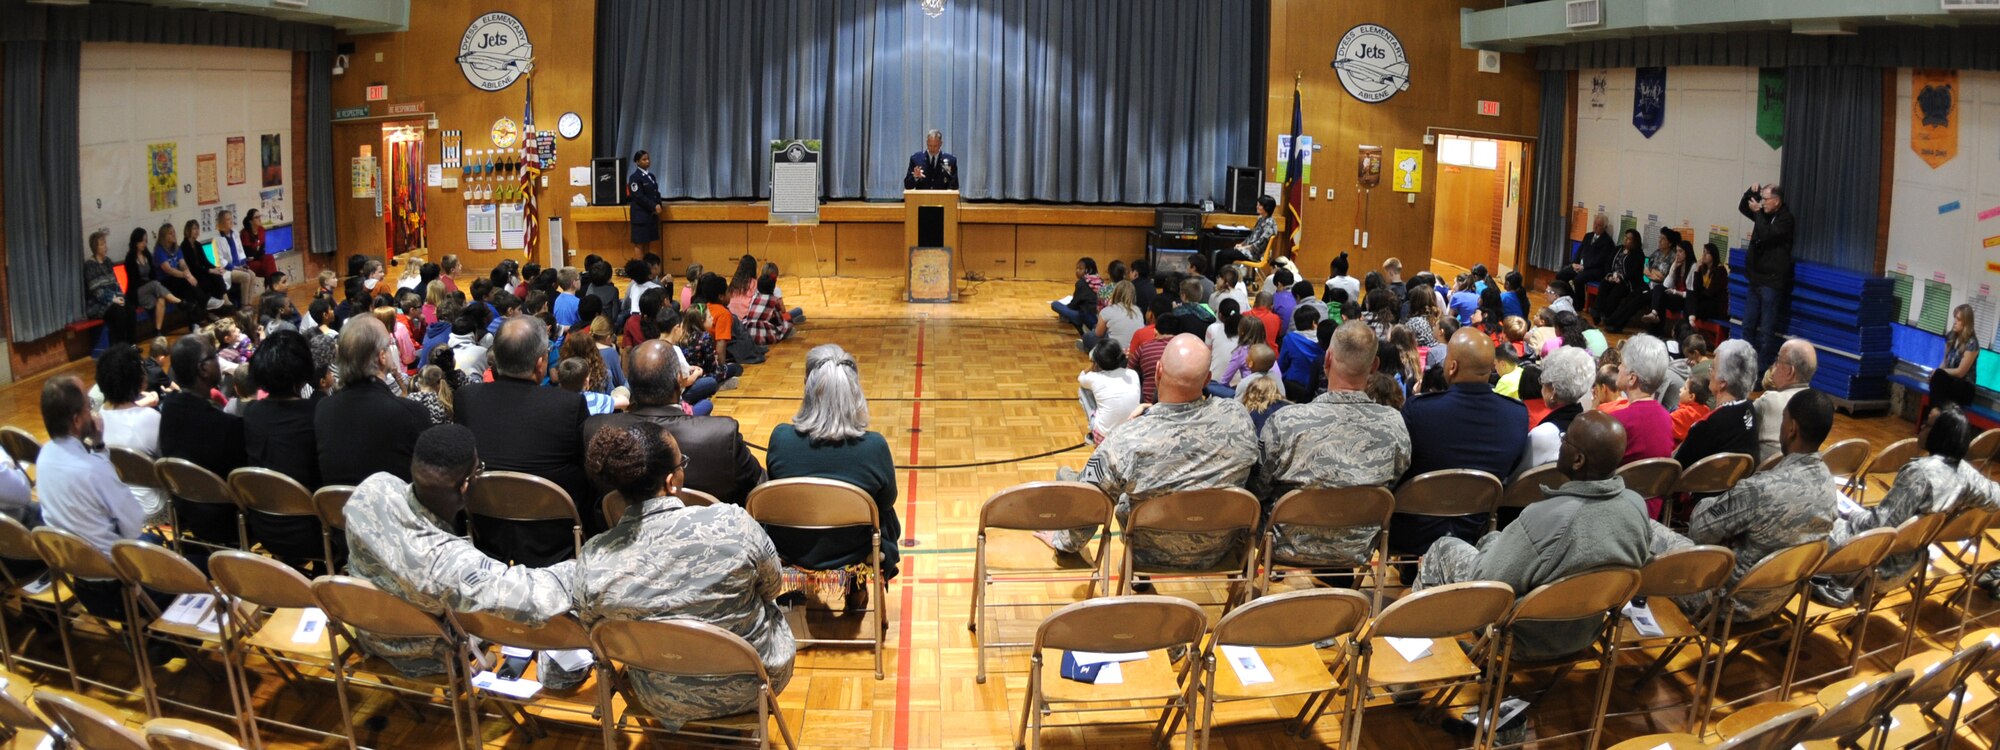 Dyess Elementary students and faculty, parents, local community members and Dyess Airmen attend a ceremony Feb. 22, 2016, at Dyess Elementary in Abilene, Texas. The Dyess African-American Heritage Committee hosted a ceremony to honor Dyess Elementary receiving a Texas Historical Commission Marker for being the first elementary in Abilene Independent School District to become racially integrated. (U.S. Air Force photo by Senior Airman Shannon Hall/Released)